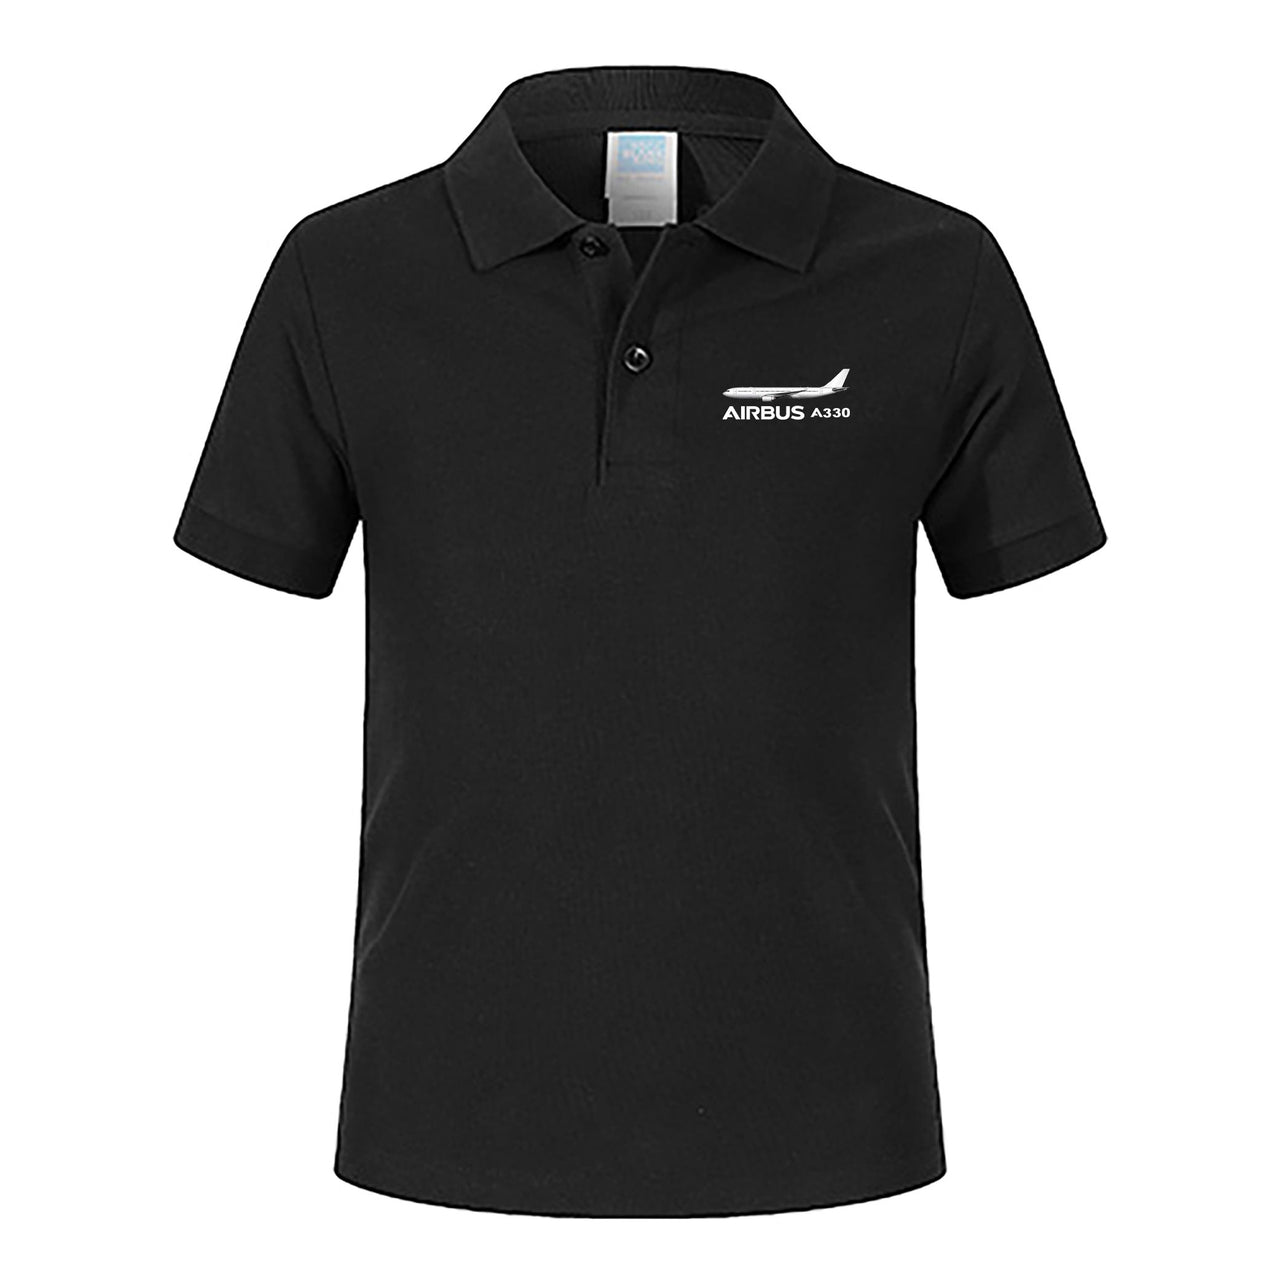 The Airbus A330 Designed Children Polo T-Shirts